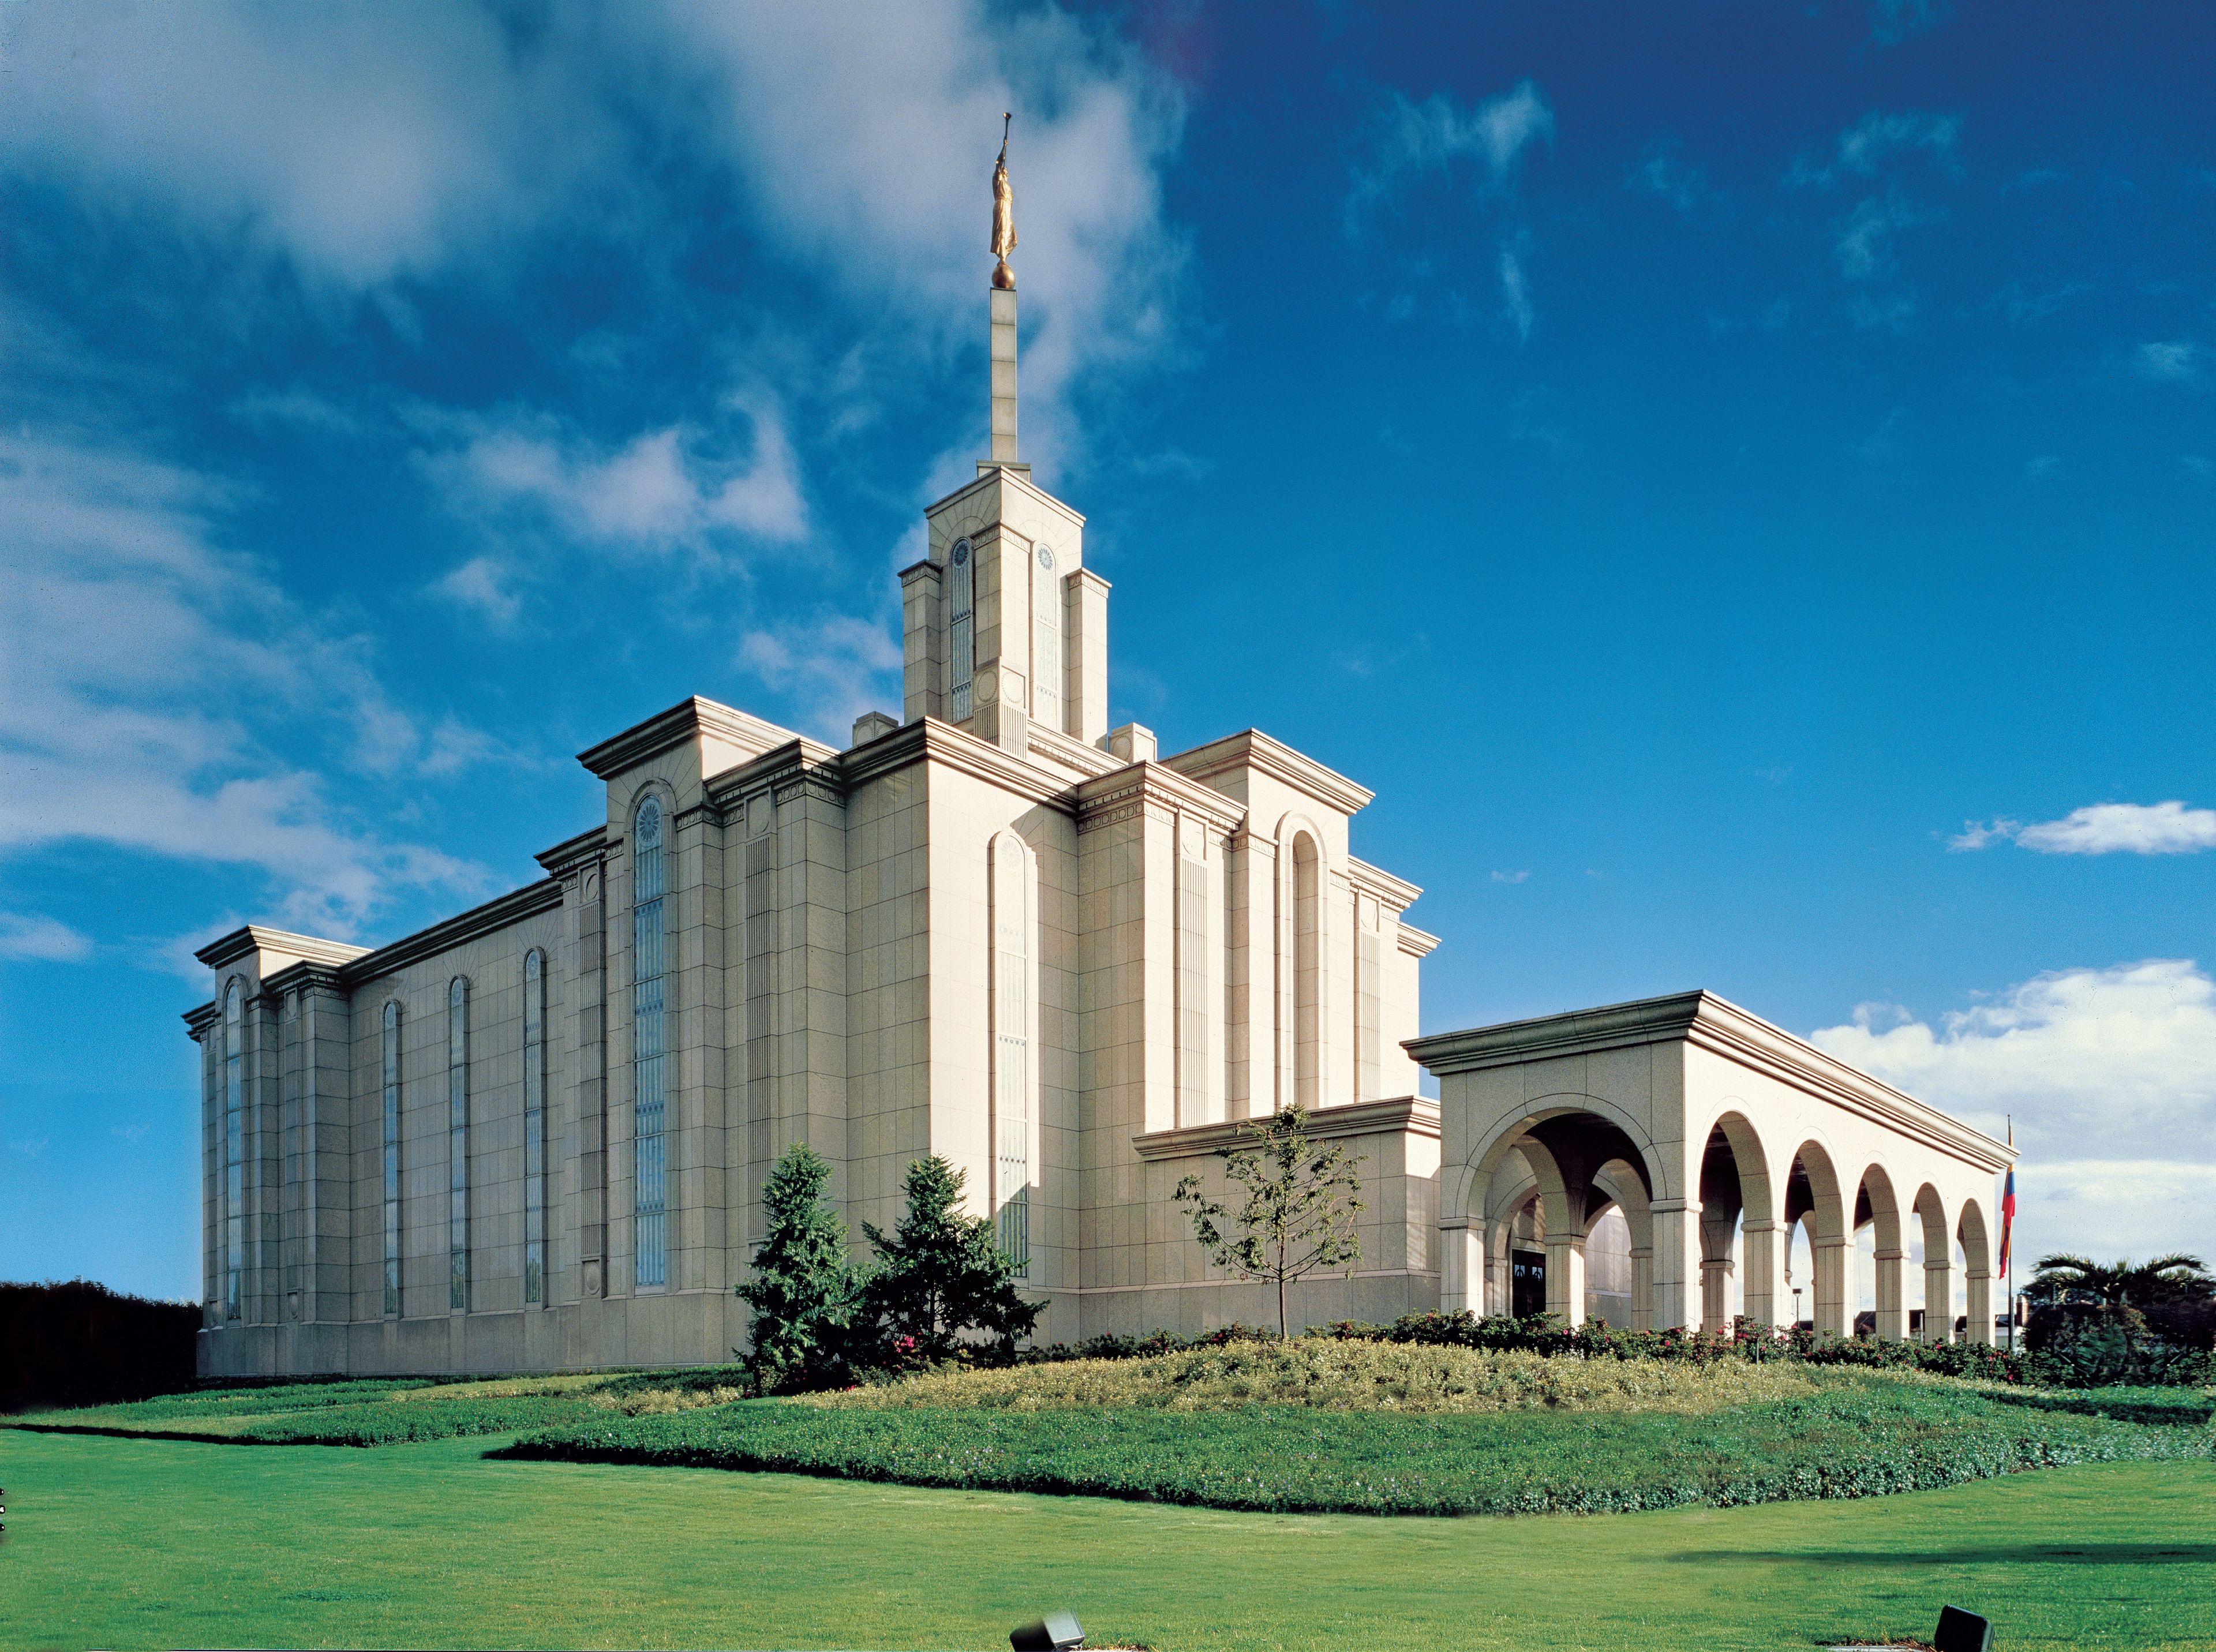 The exterior of the Bogotá Colombia Temple.